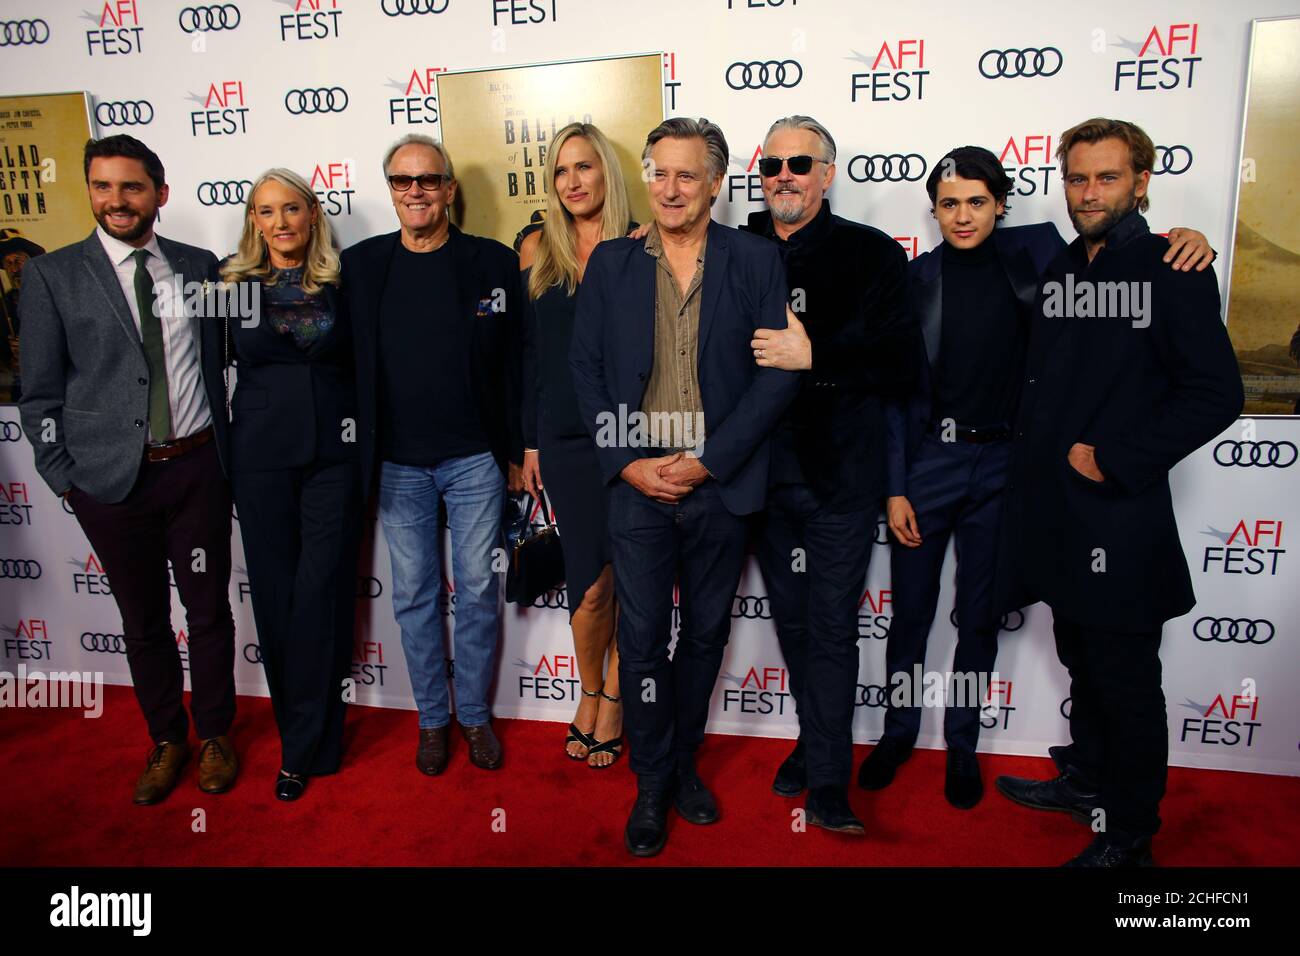 (L-R) Jared Moshe, Margaret DeVogelaere, Peter Fonda, Dina Livingston, Bill Pullman, Tommy Flanagan, Diego Josef, and Joe Anderson arrive for the screening of 'The Ballad of Lefty Brown' at the AFI Film Festival in Los Angeles, California, U.S., November 14, 2017.      REUTERS/Mike Blake Stock Photo